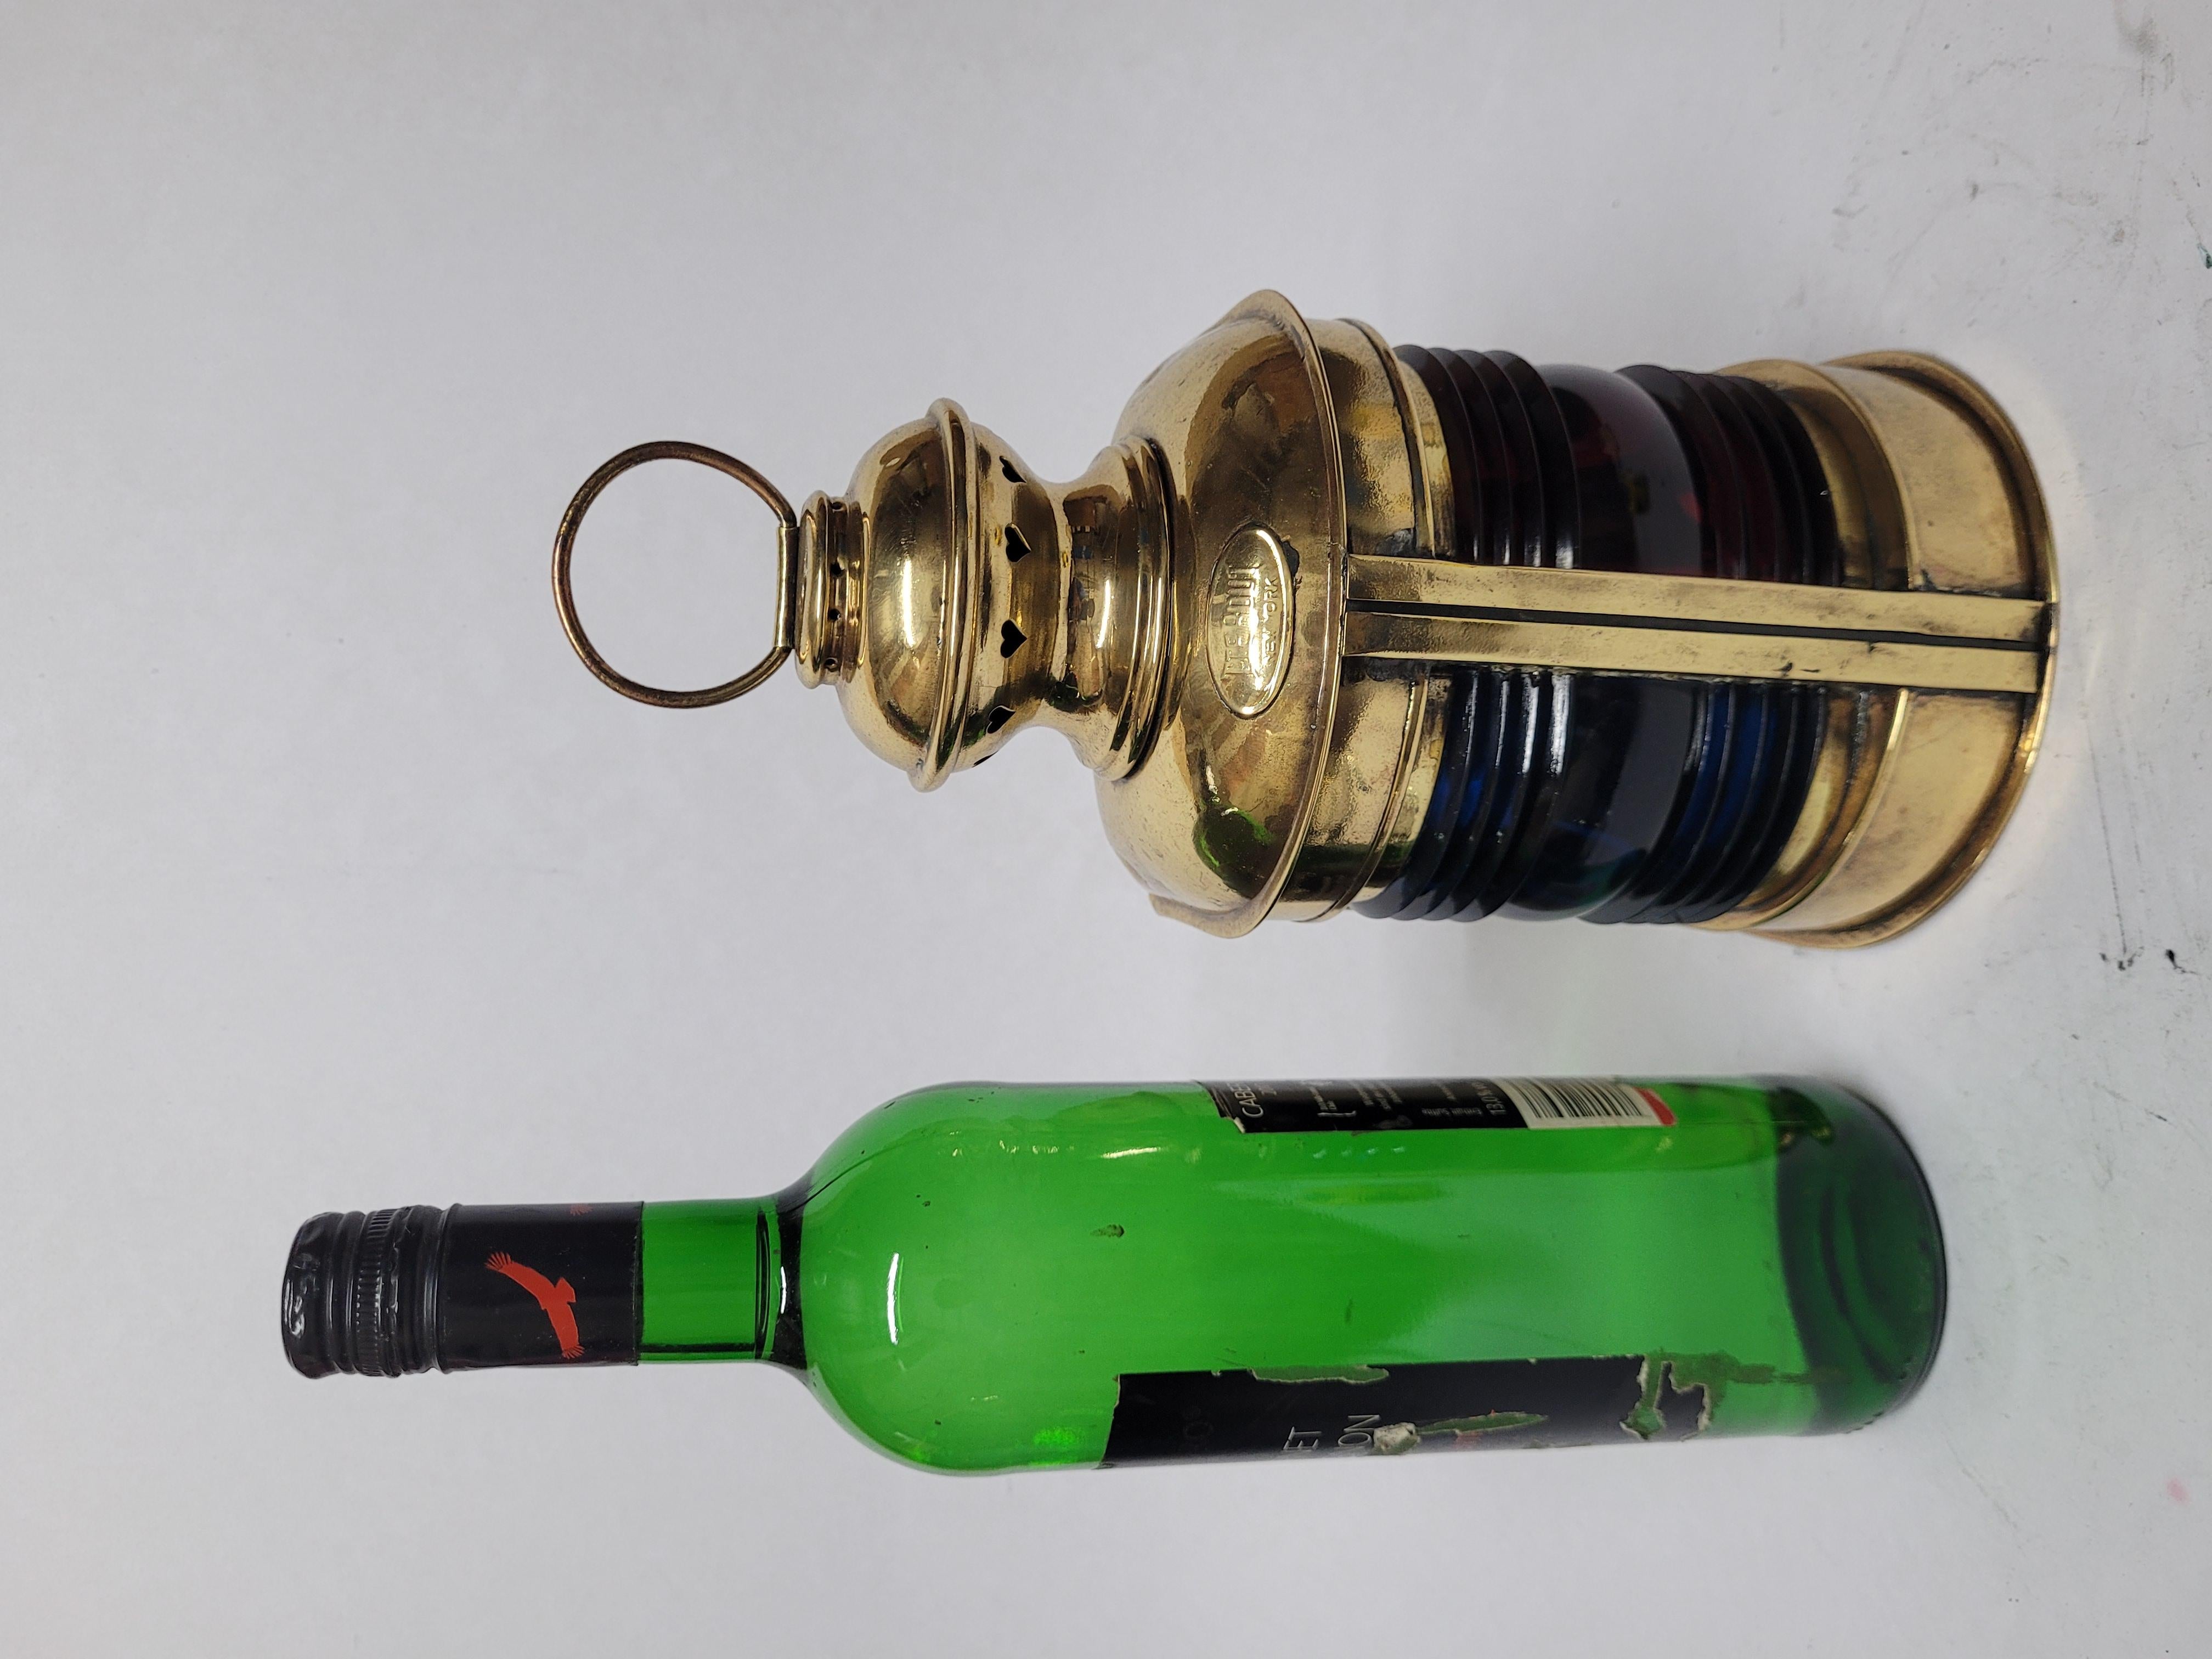 North American Antique Boat Lantern of Solid Brass For Sale